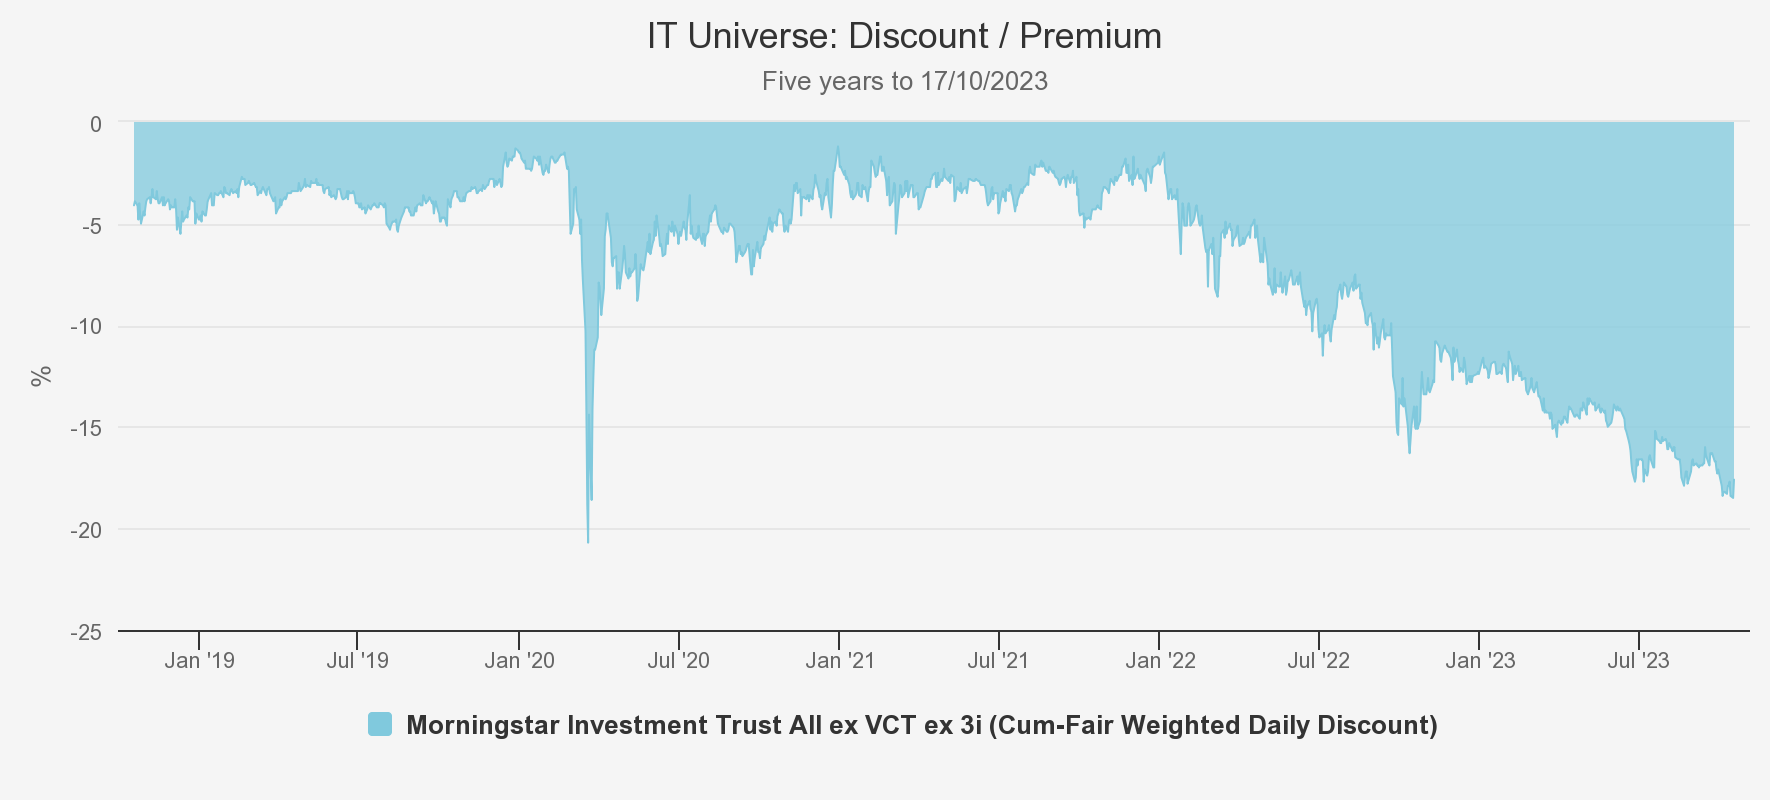 it-universe-discount chart from Kepler Oct 26 